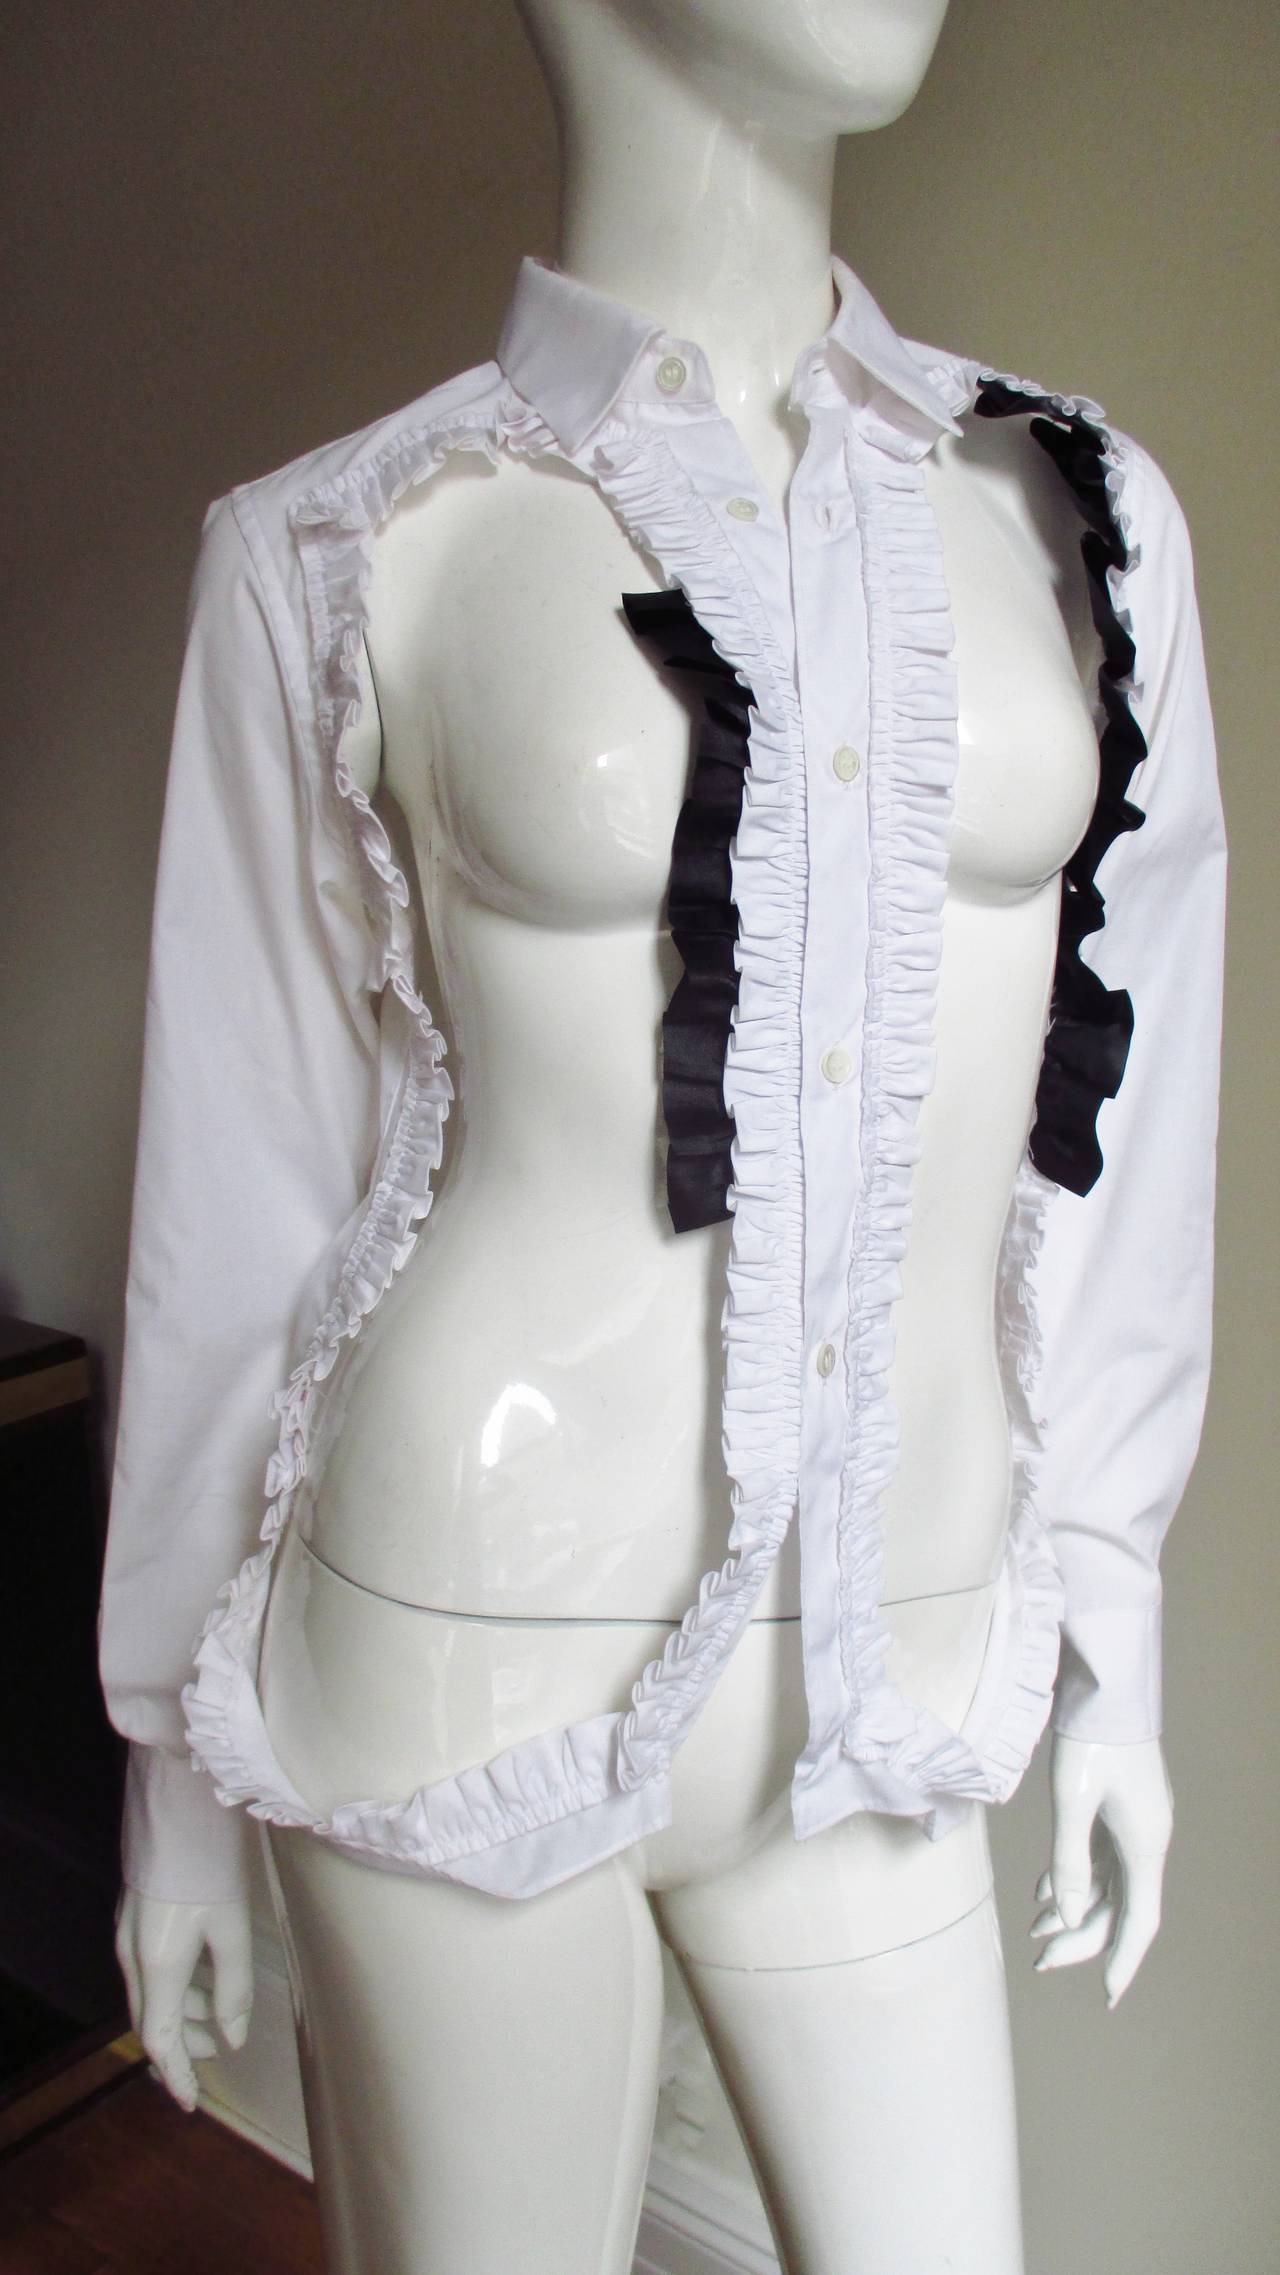 A fabulous black and white cotton avant garde shirt from Comme des Garcons CDG. It has long sleeves with button cuffs and is cutout on the from from shoulders to the hem with the exception of the front button placket. There are white ruffles and